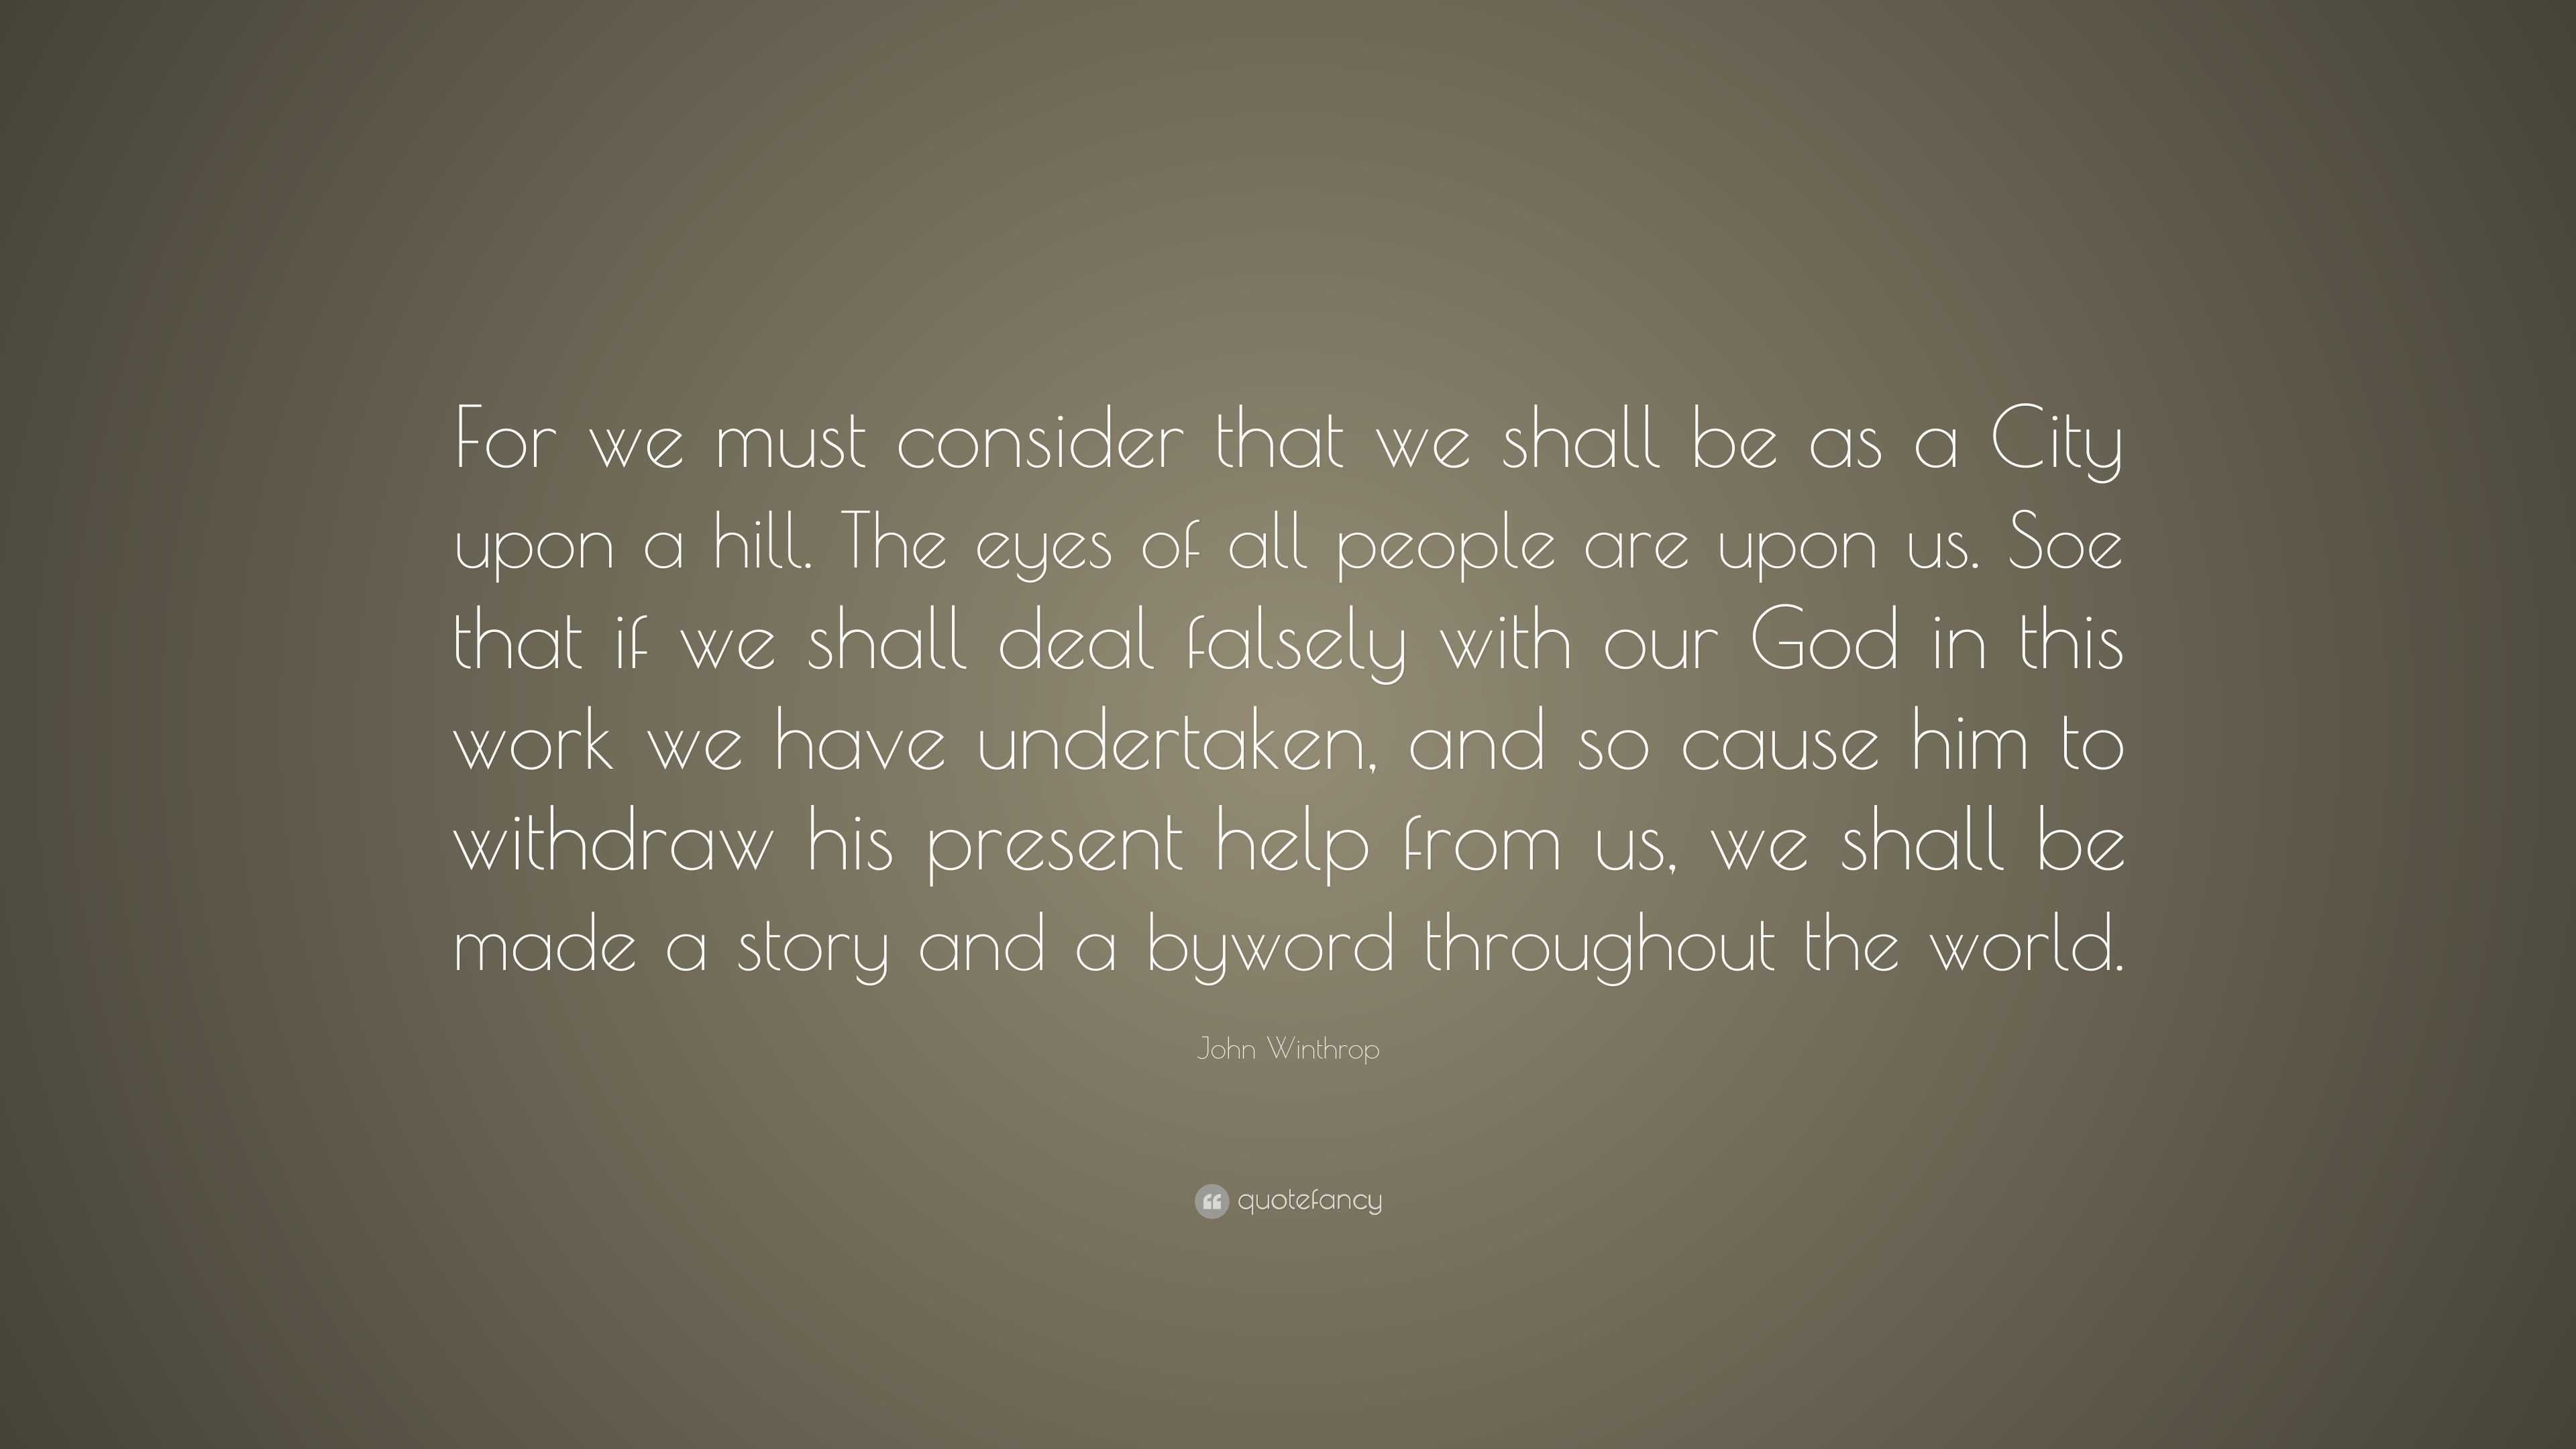 John Winthrop Quote: “For we must consider that we shall be as a City ...